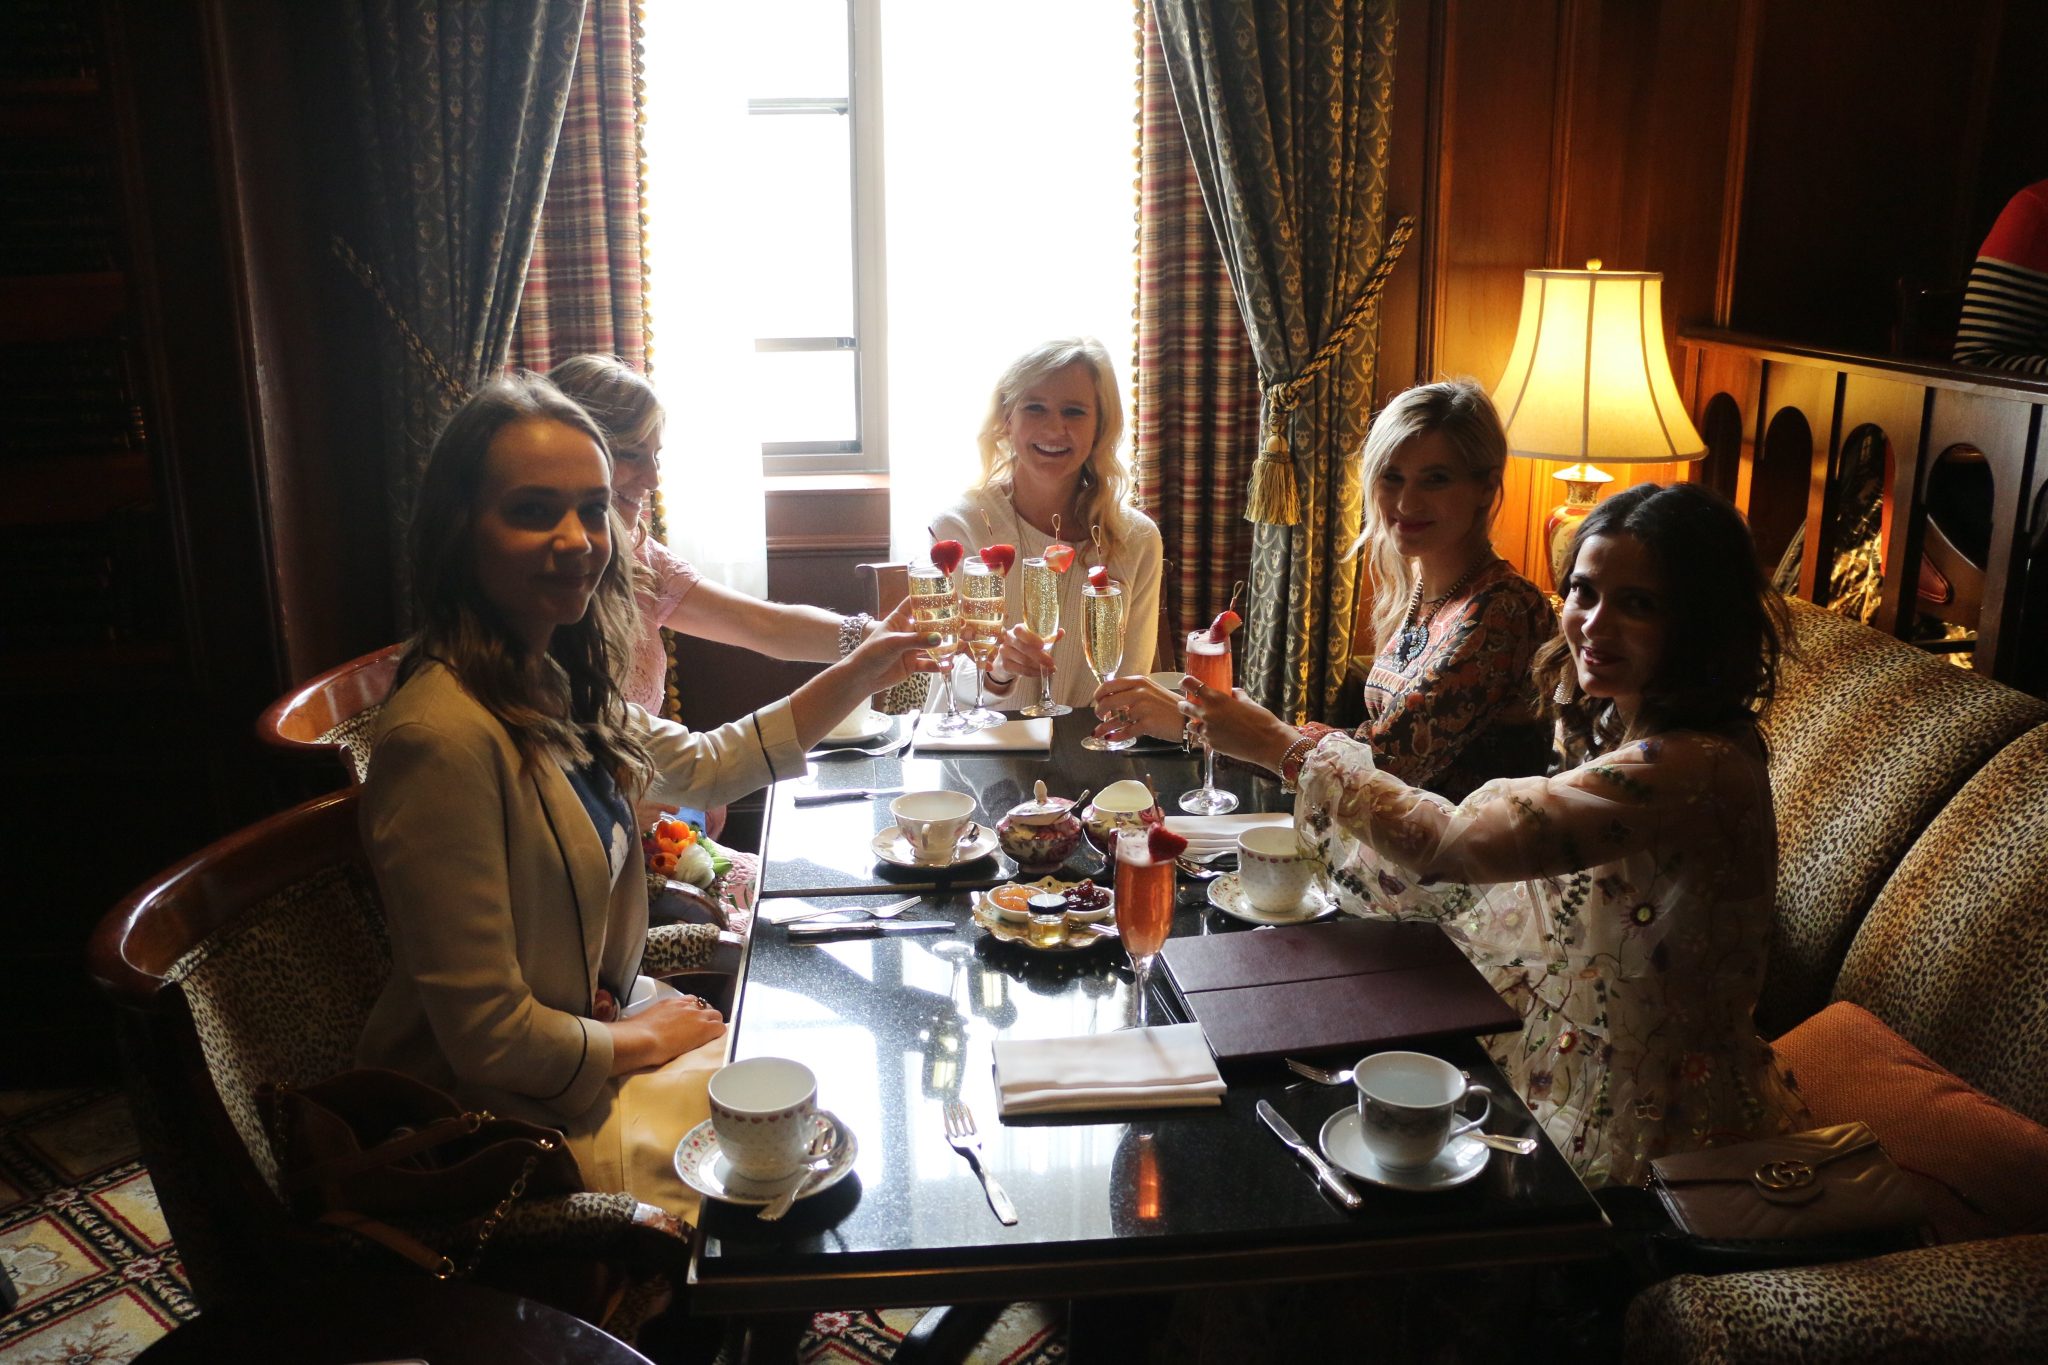 afternoon tea with girlfriends at the Fairmont Royal York Hotel Toronto